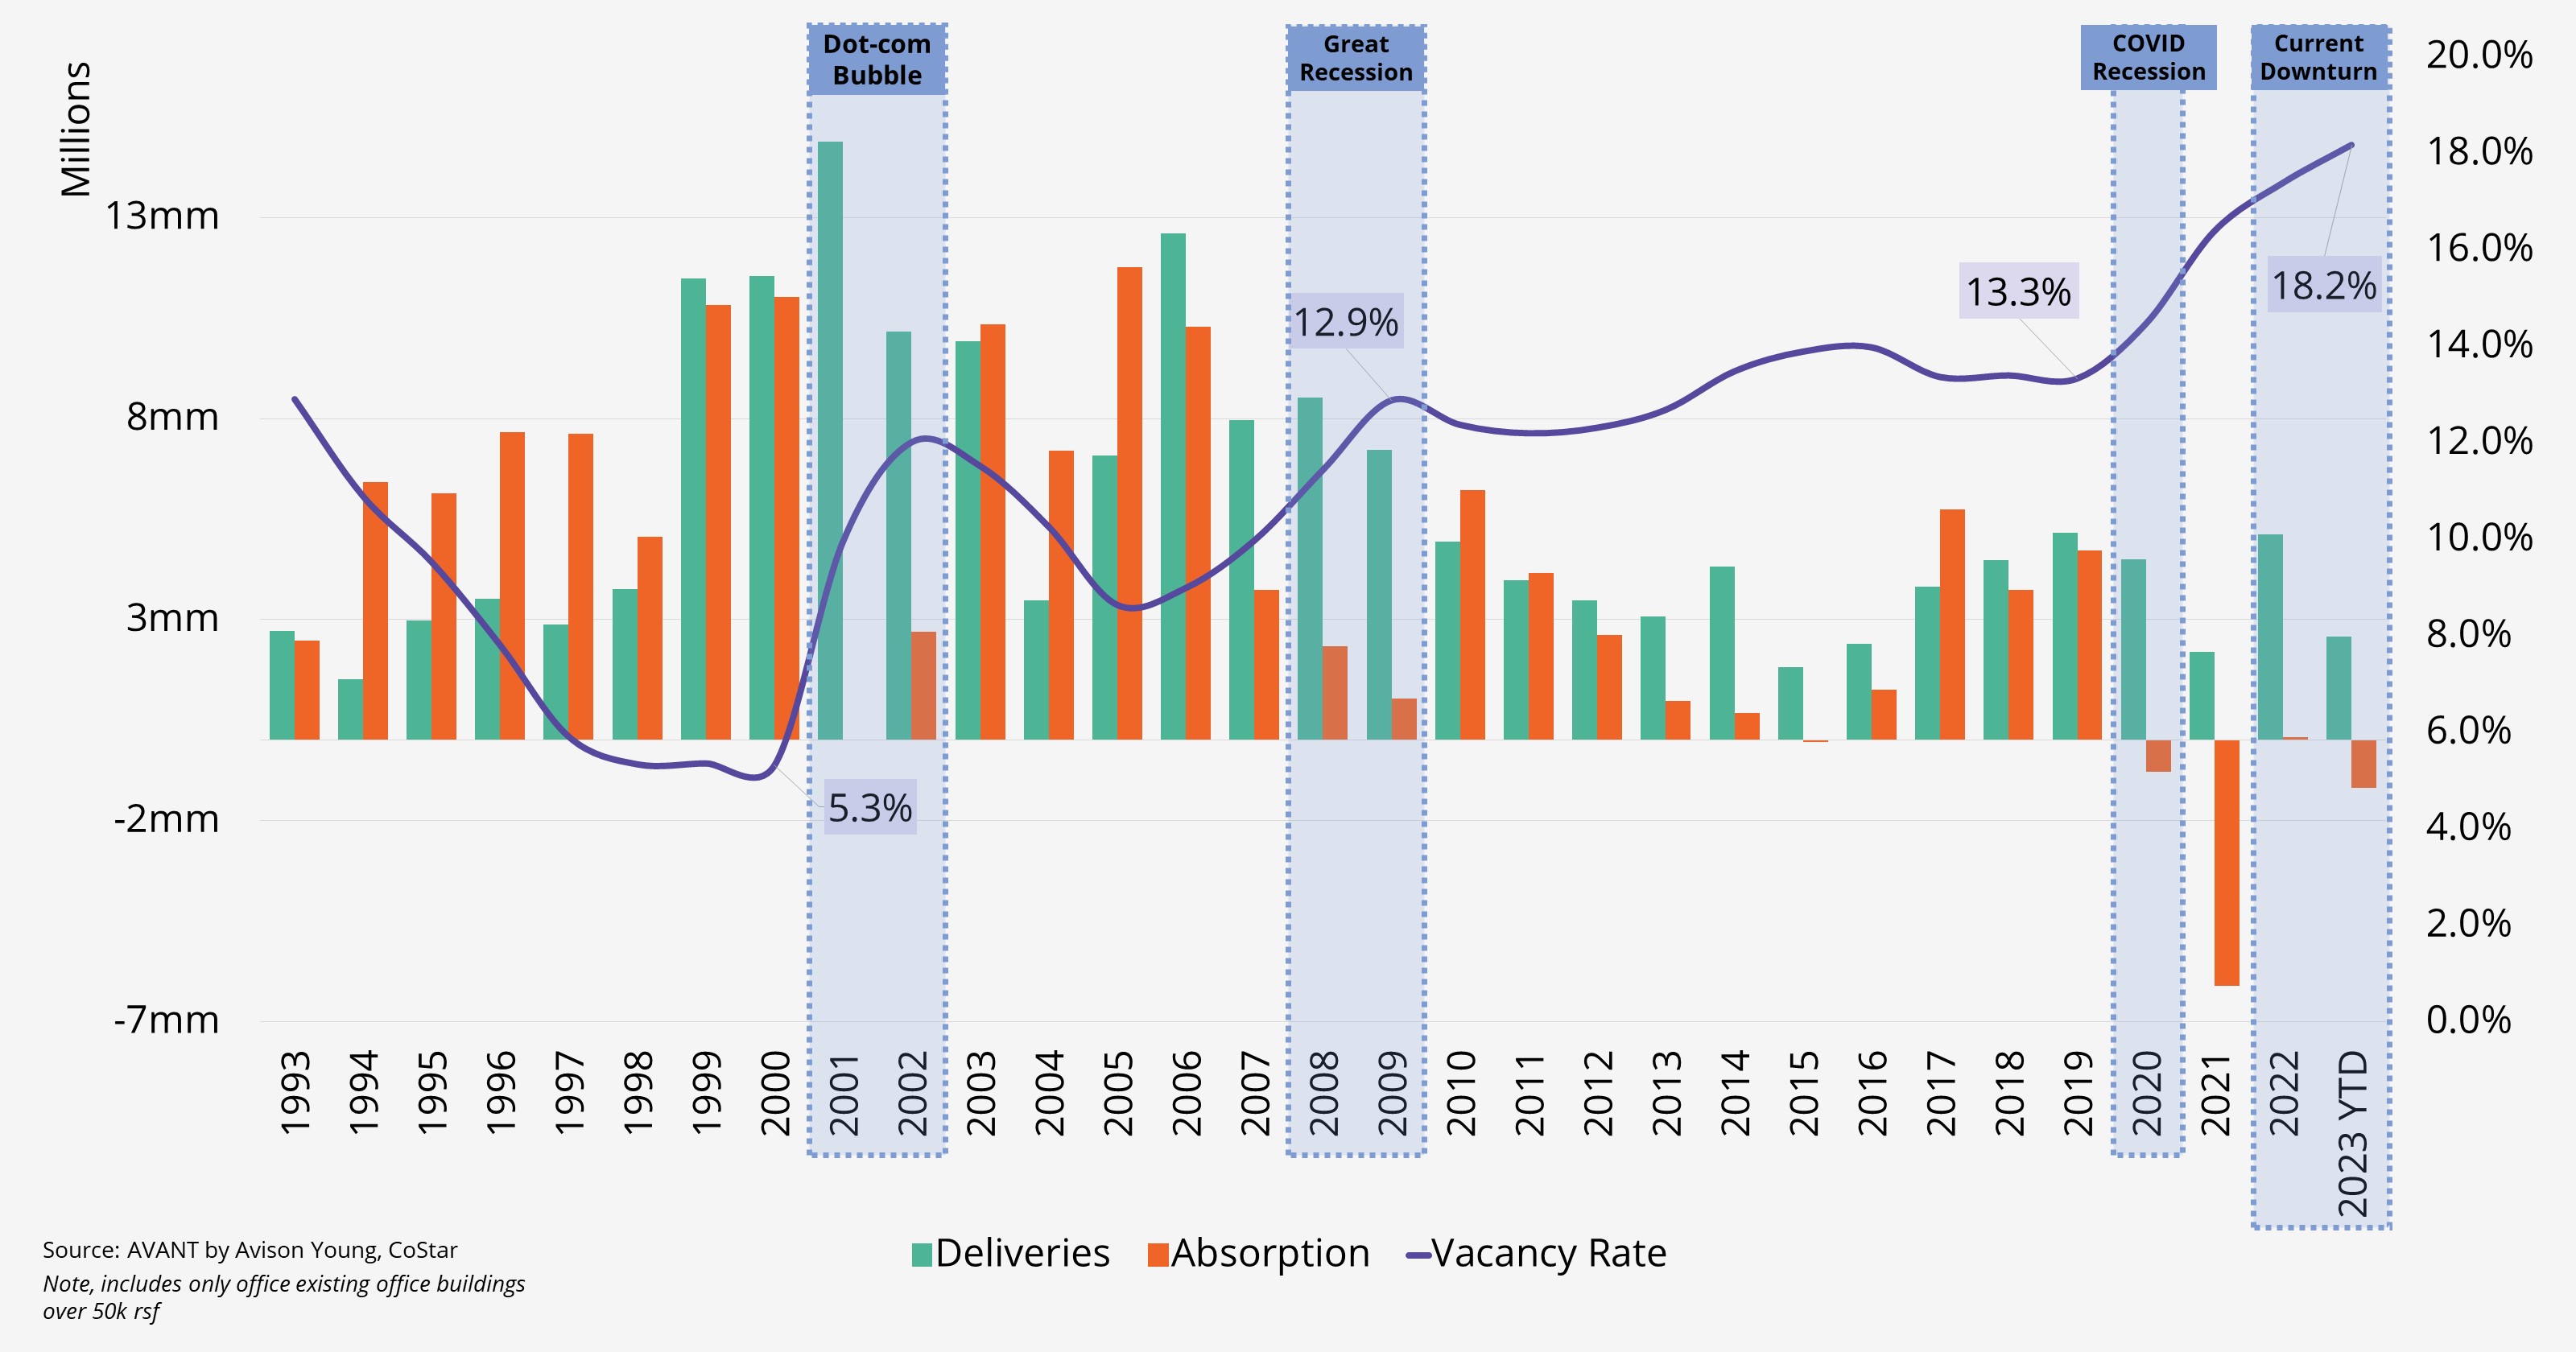 Bar graph highlighting how deliveries, vacancy rates, and absorption shifted during major economic moments such as the dot-com bubble and great recession